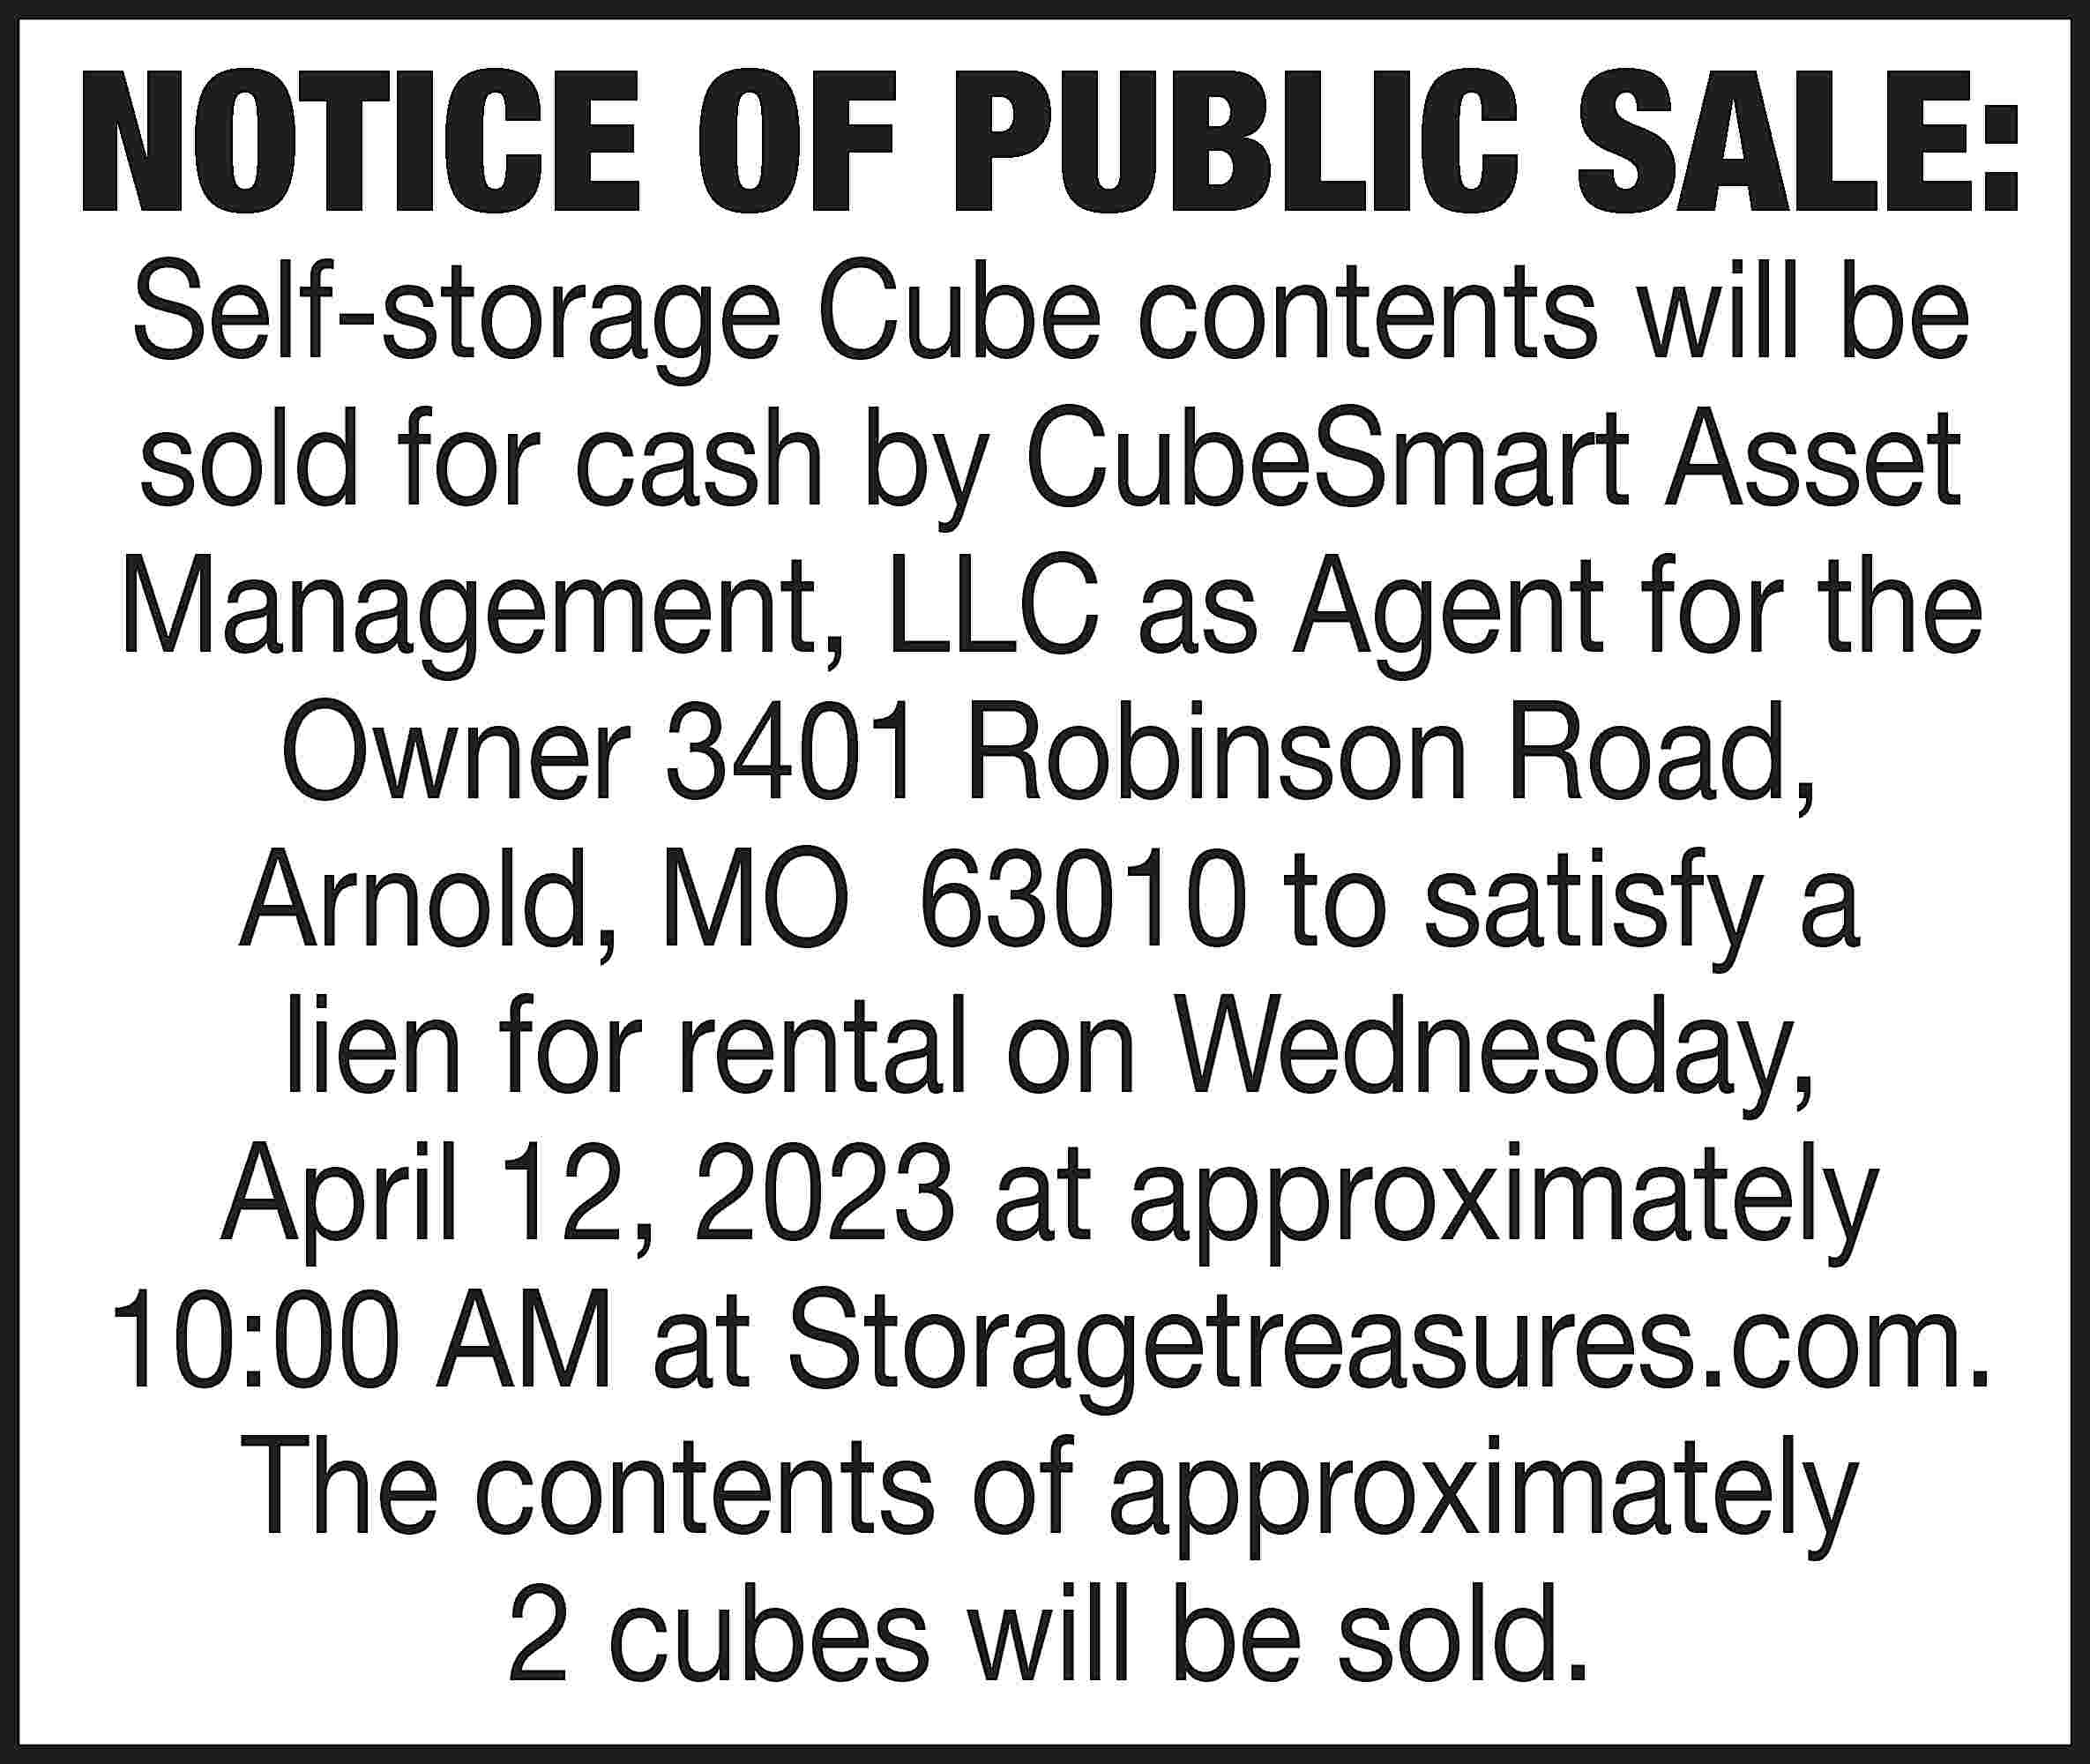 NOTICE OF PUBLIC SALE: Self-storage  NOTICE OF PUBLIC SALE: Self-storage Cube contents will be sold for cash by CubeSmart Asset Management, LLC as Agent for the Owner 3401 Robinson Road, Arnold, MO 63010 to satisfy a lien for rental on Wednesday, April 12, 2023 at approximately 10:00 AM at Storagetreasures.com. The contents of approximately 2 cubes will be sold.